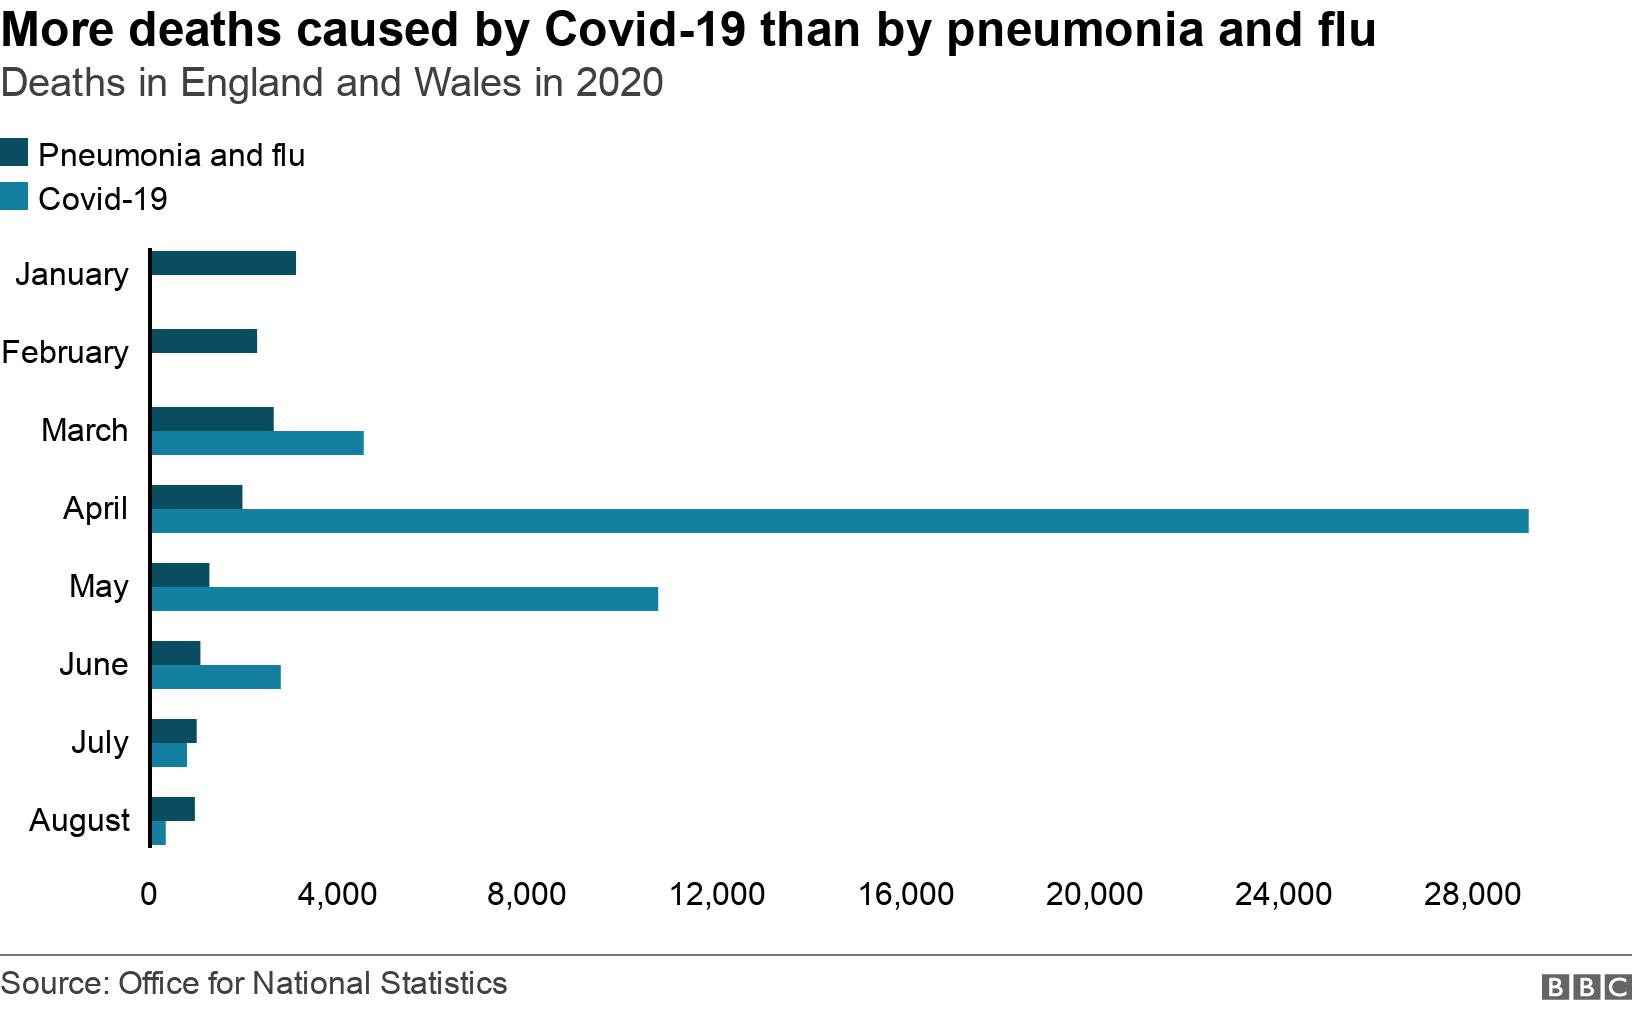 More deaths caused by Covid-19 than by pneumonia and flu. Deaths in England and Wales in 2020. The number of deaths due to pneumonia and flu peaked in January below 5,000. Covid-19 deaths peaked in April above 25,000. .